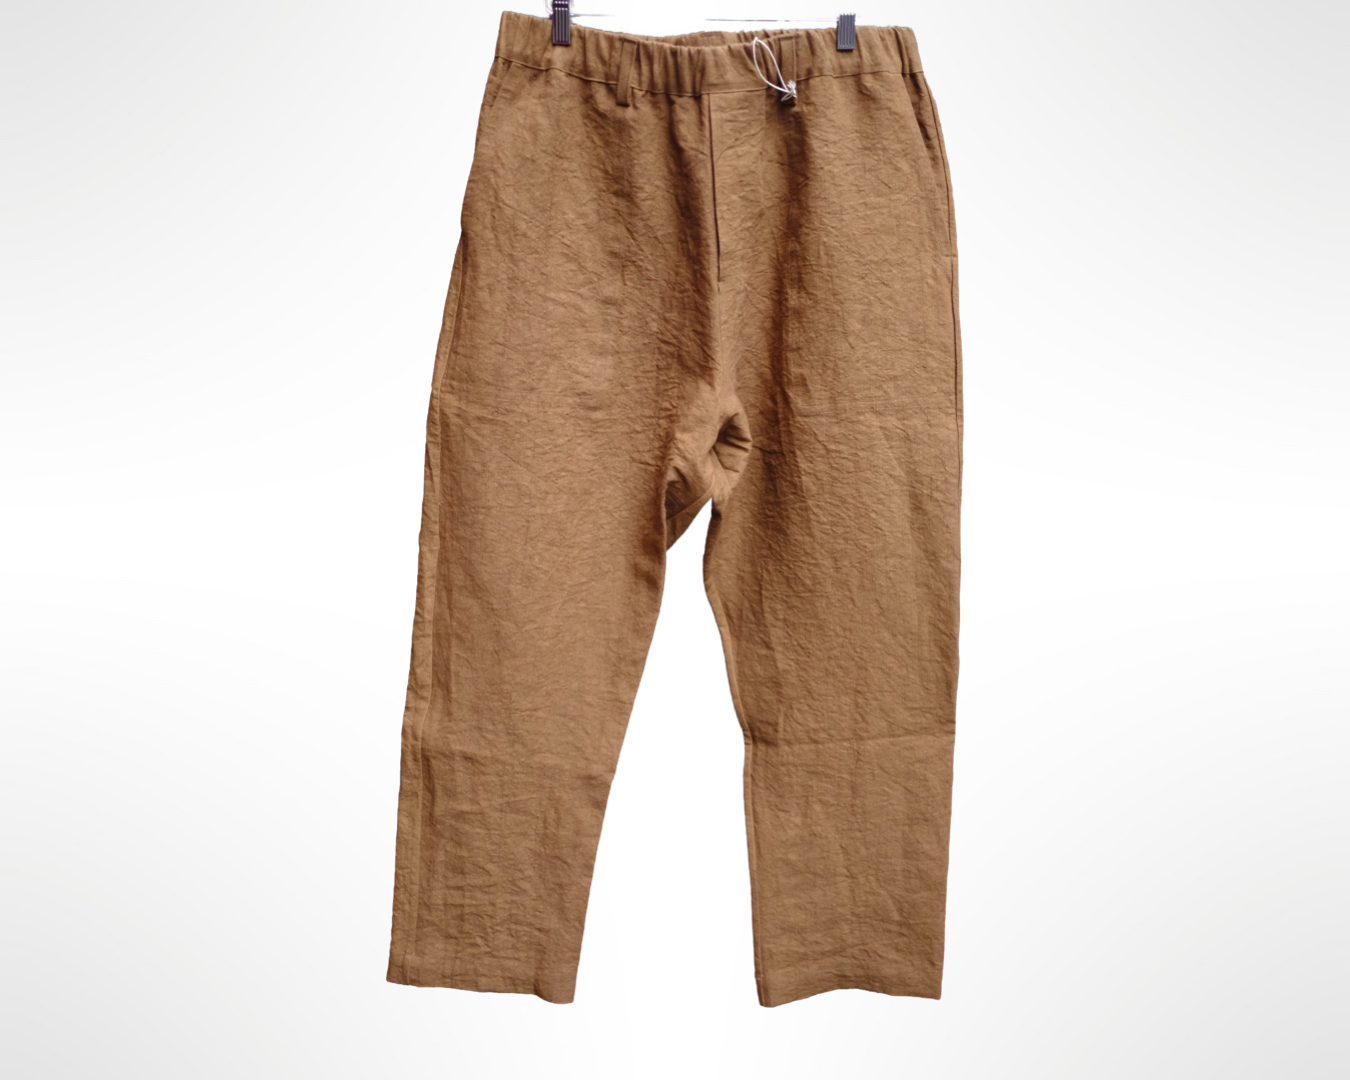 work pants in persimmon dyed paper/linen